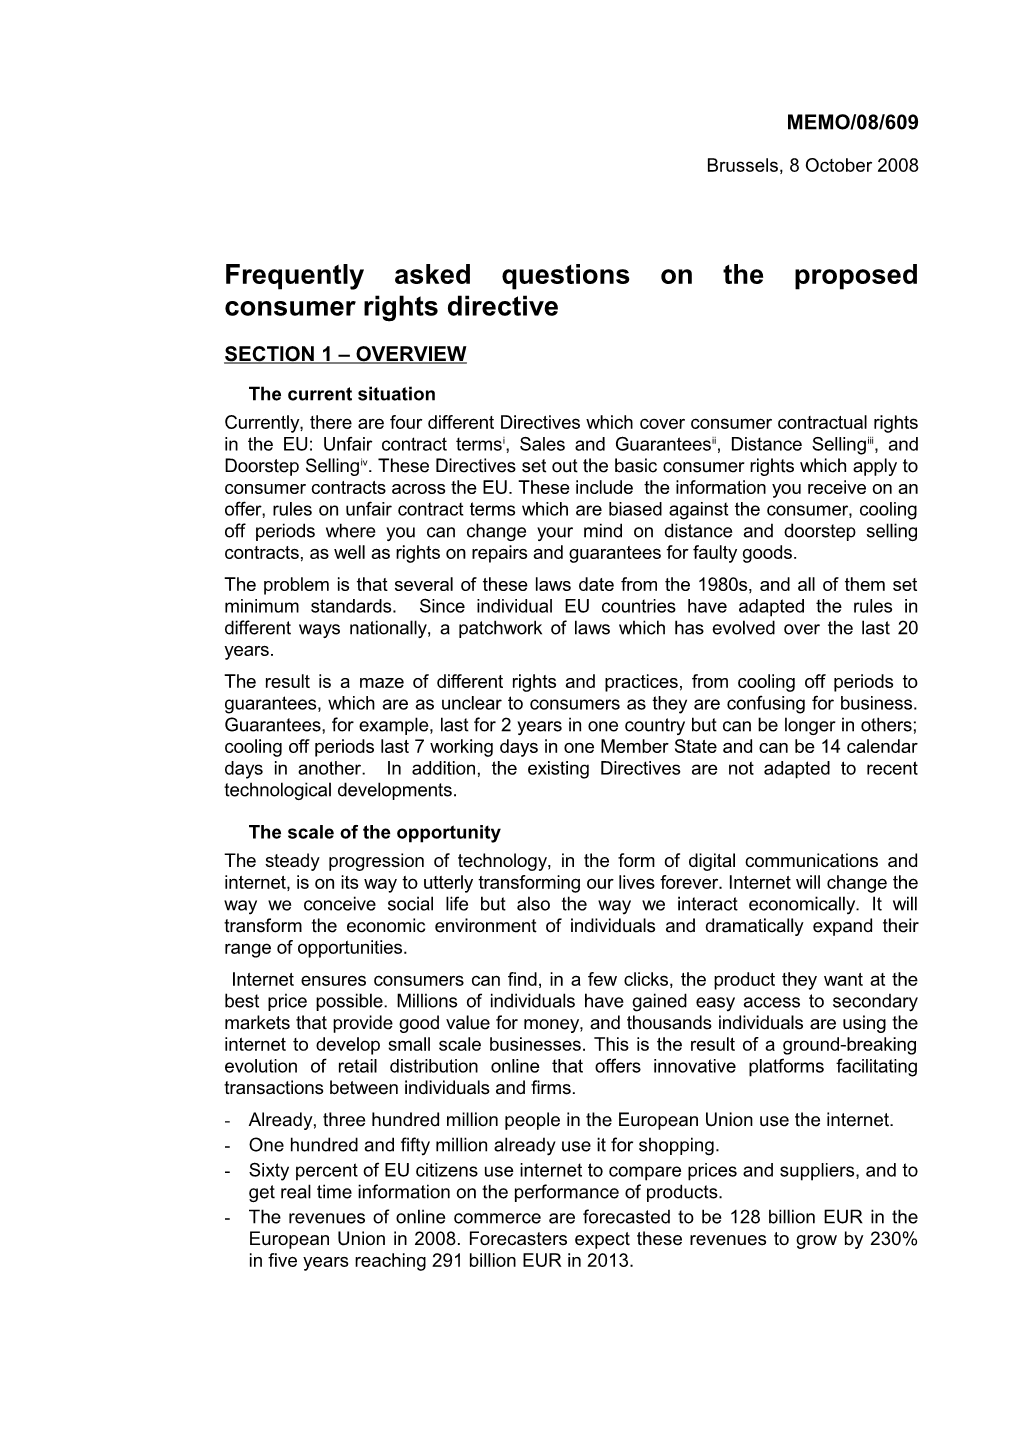 Frequently Asked Questions on the Proposed Consumer Rights Directive